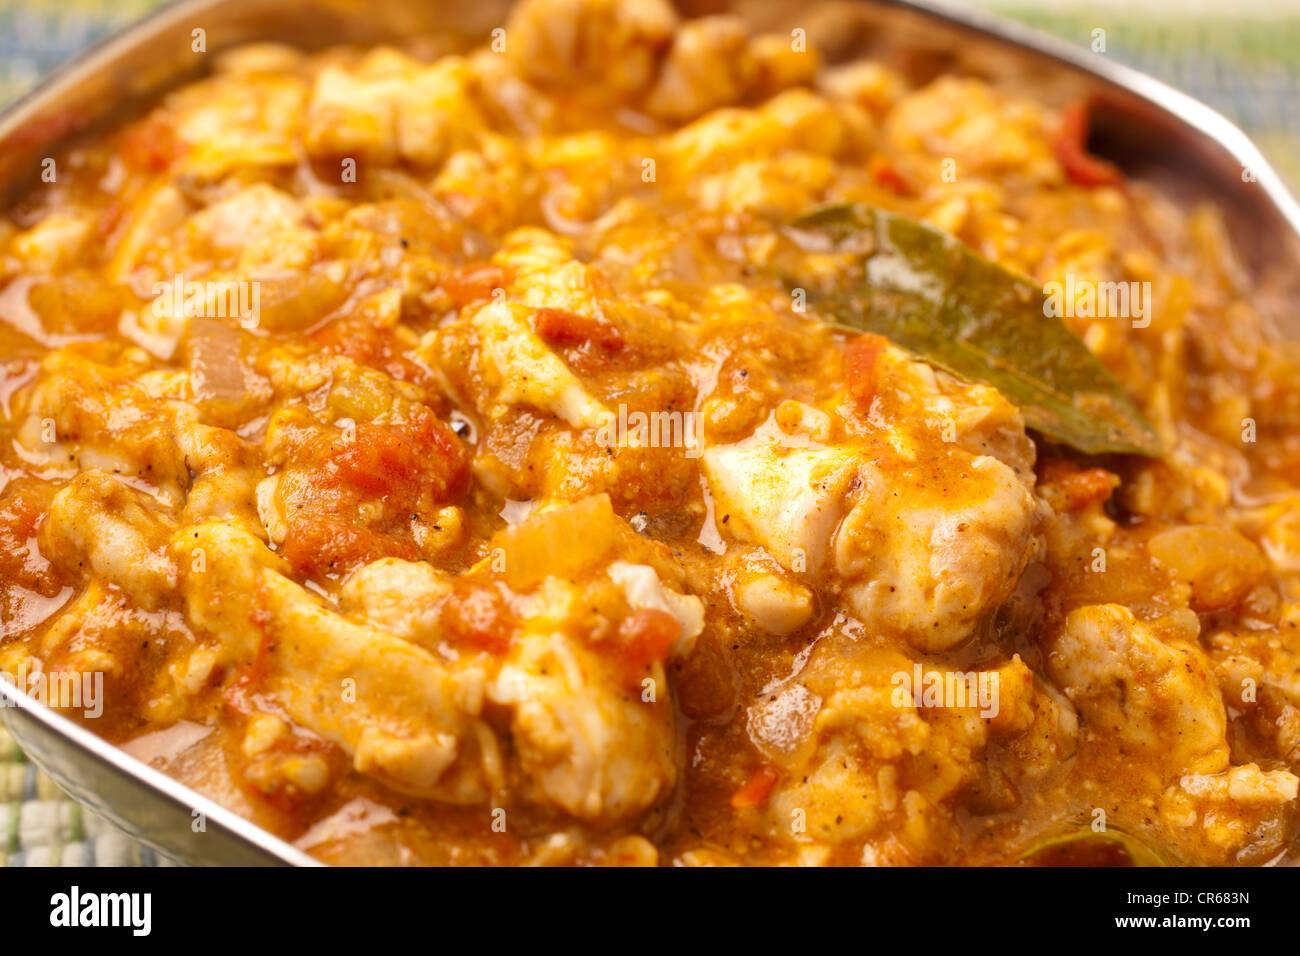 Bheja Fry, also called curried goat brains Stock Photo